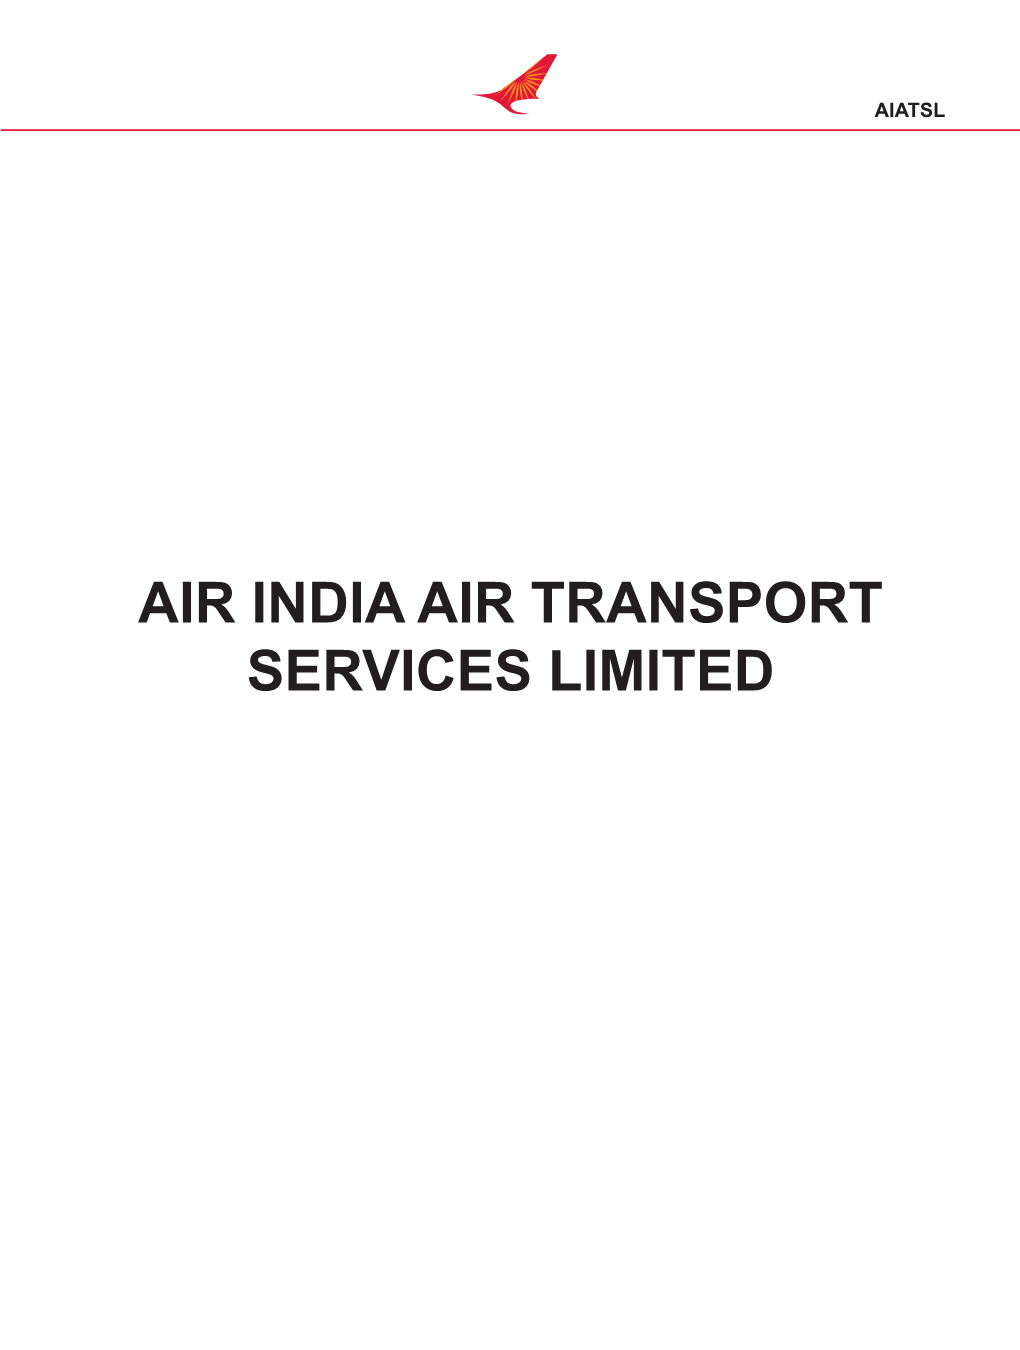 Air India Air Transport Services Limited Aiatsl